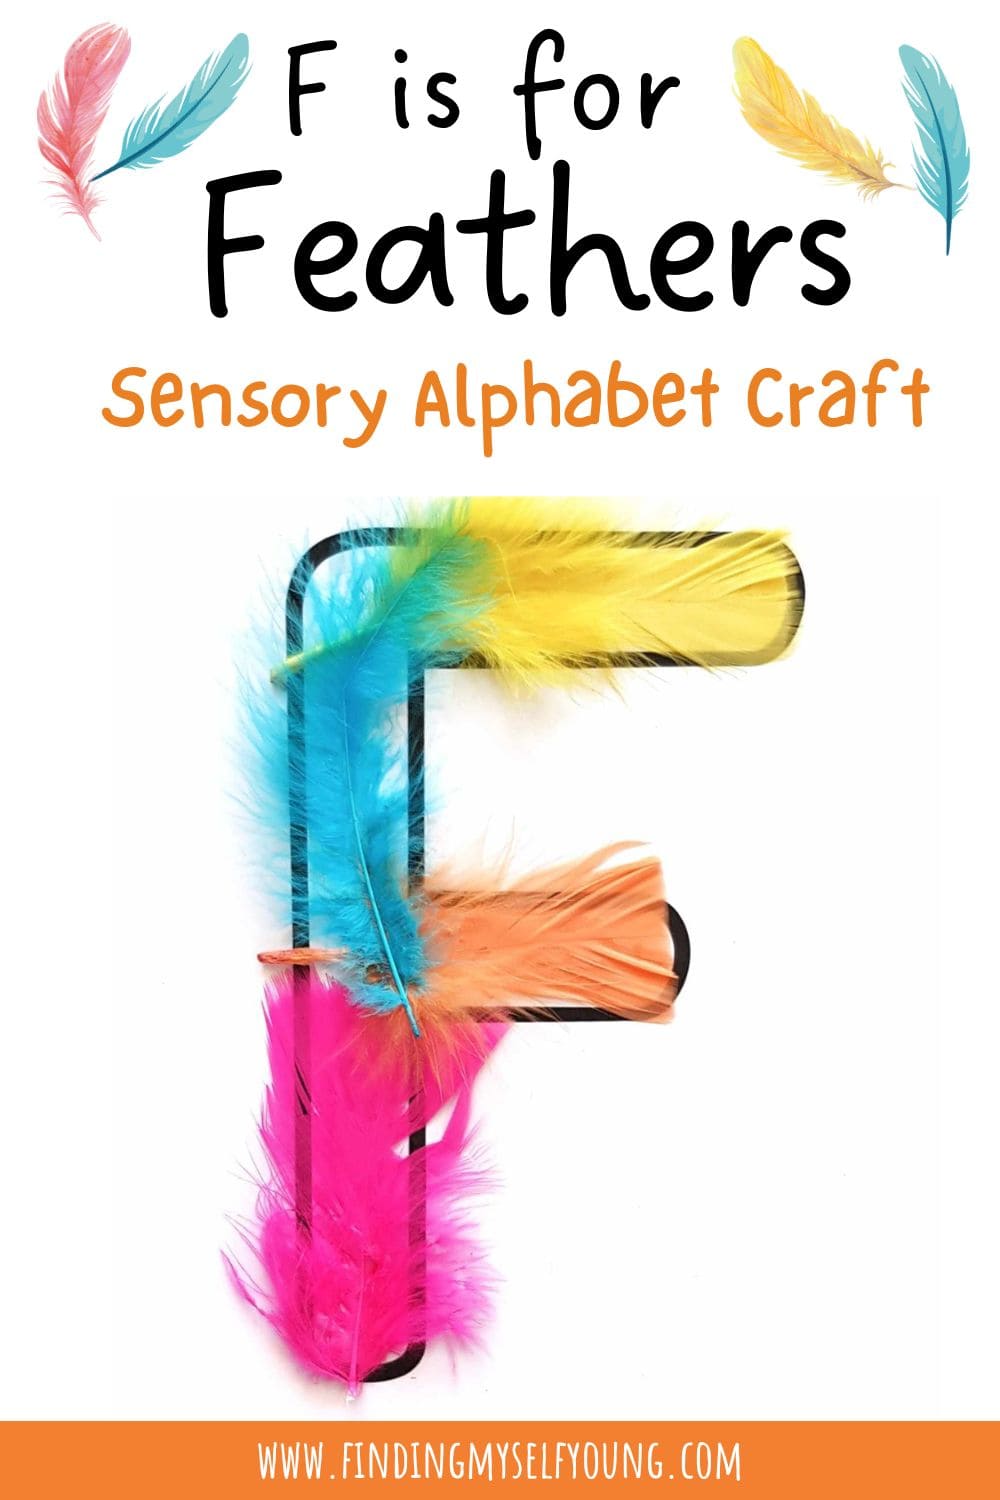 F is for feathers sensory tactile letter F craft for kids.